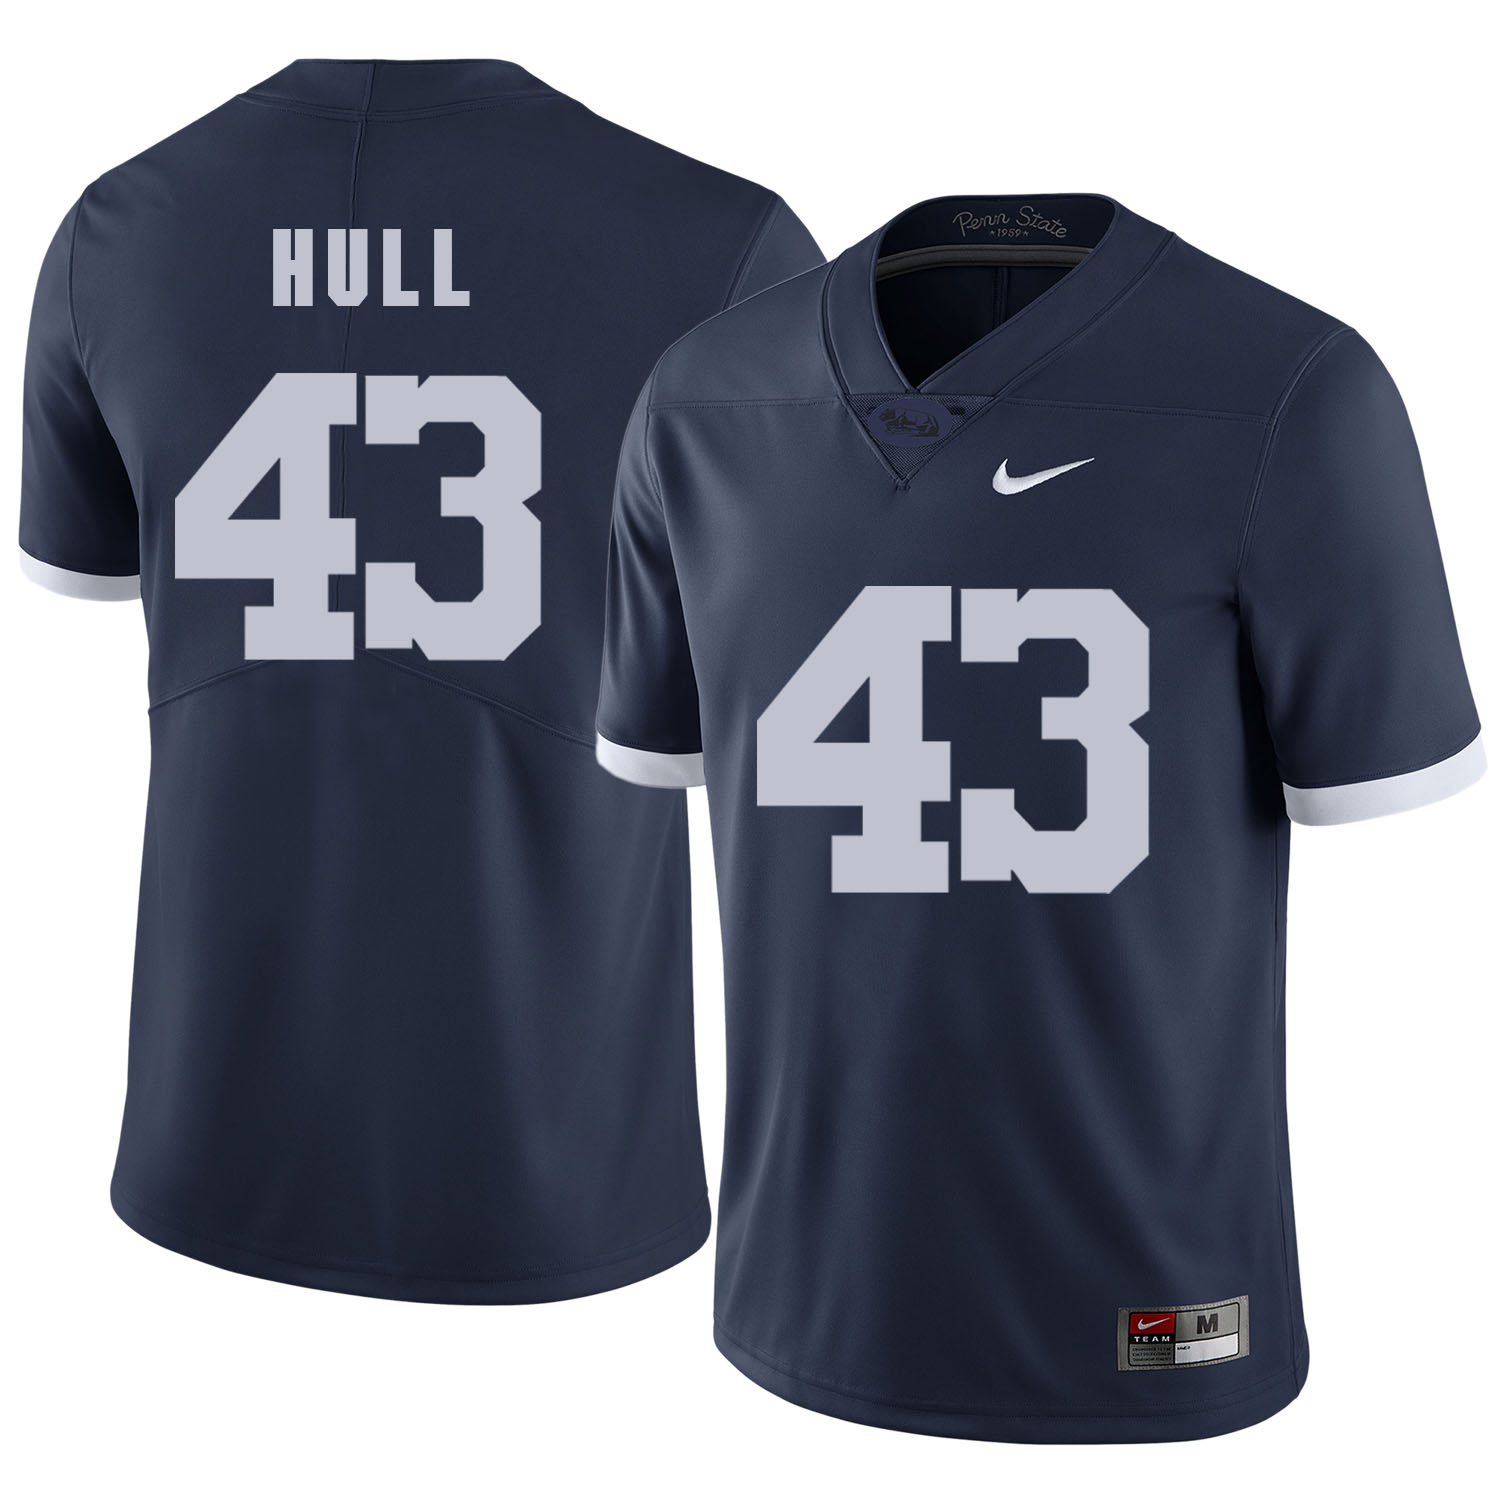 Penn State Nittany Lions 43 Mike Hull Navy College Football Jersey